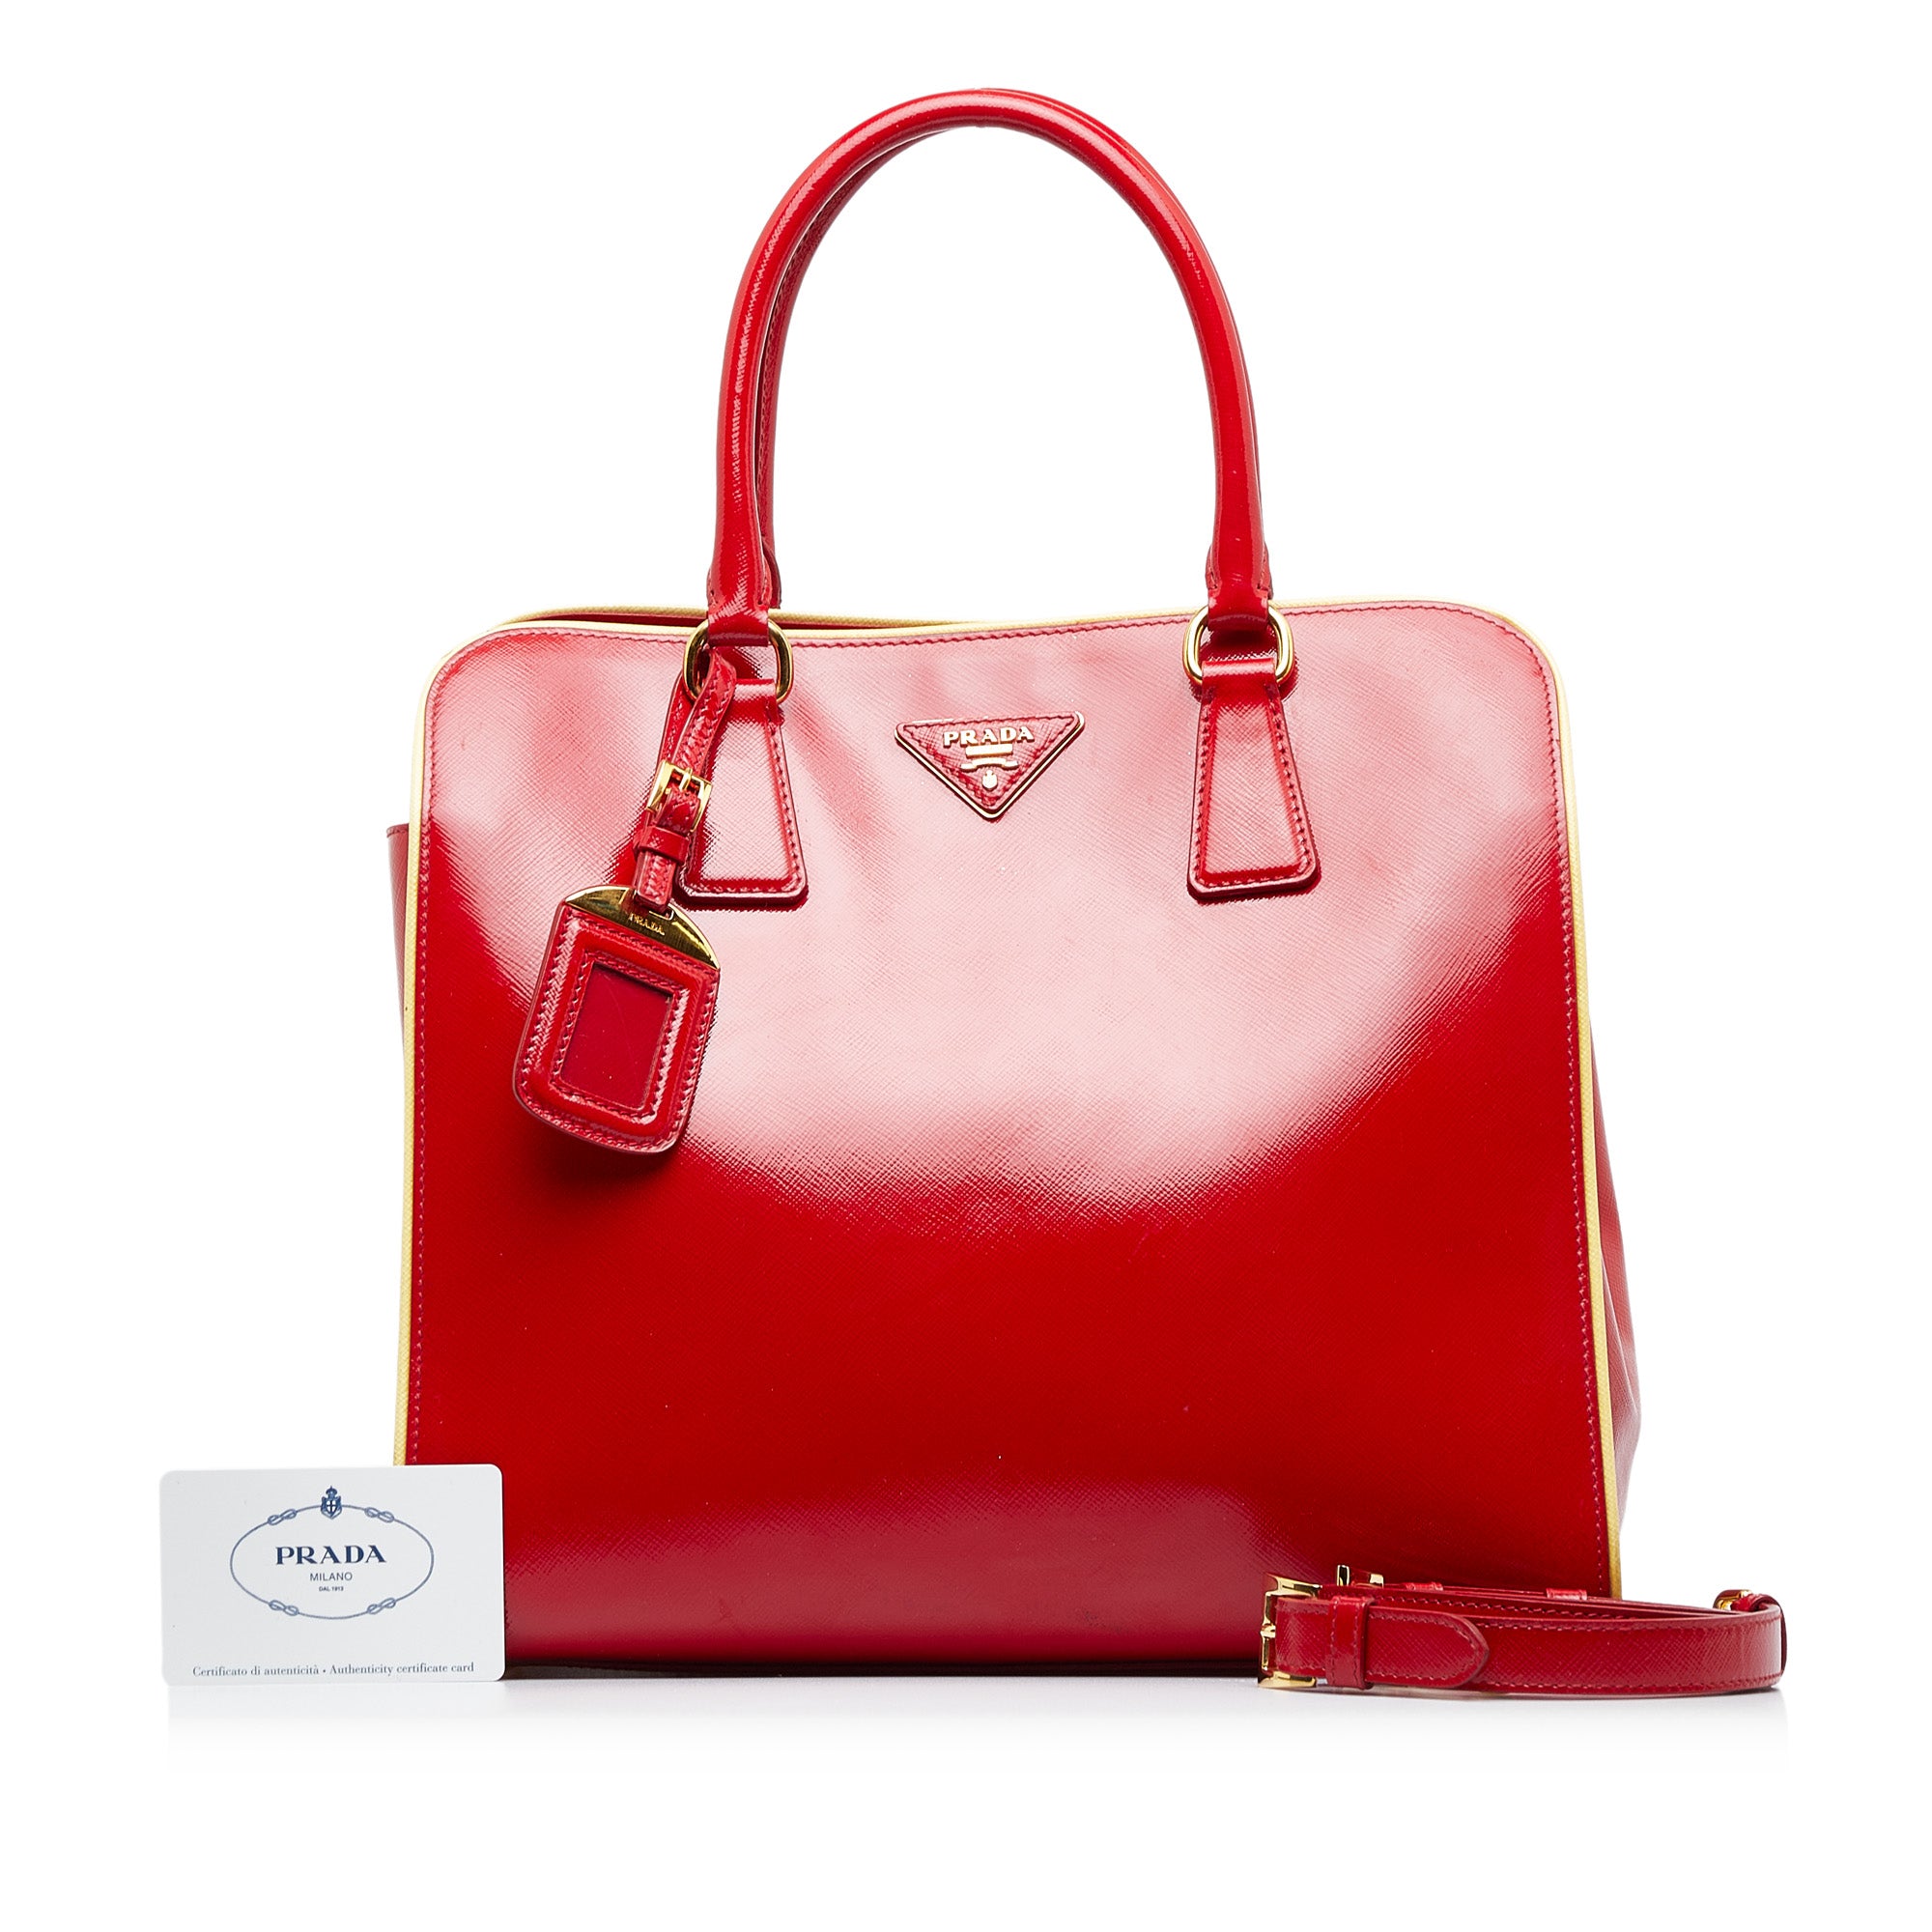 Prada - Authenticated Handbag - Leather Red Plain for Women, Very Good Condition